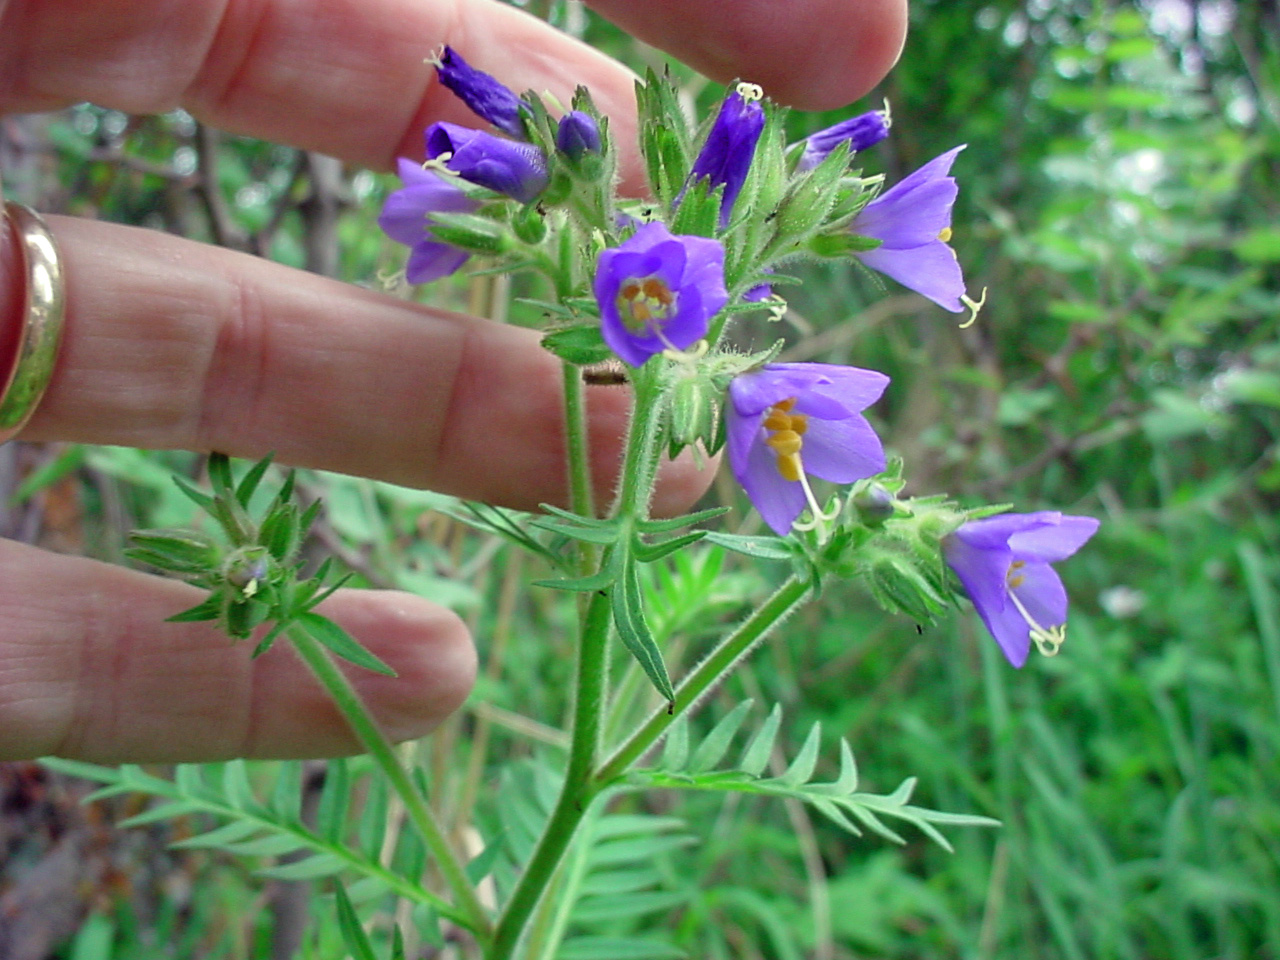 Cluster of purple, bell-shaped flowers with small leaflets attached to the stem below the flower cluster